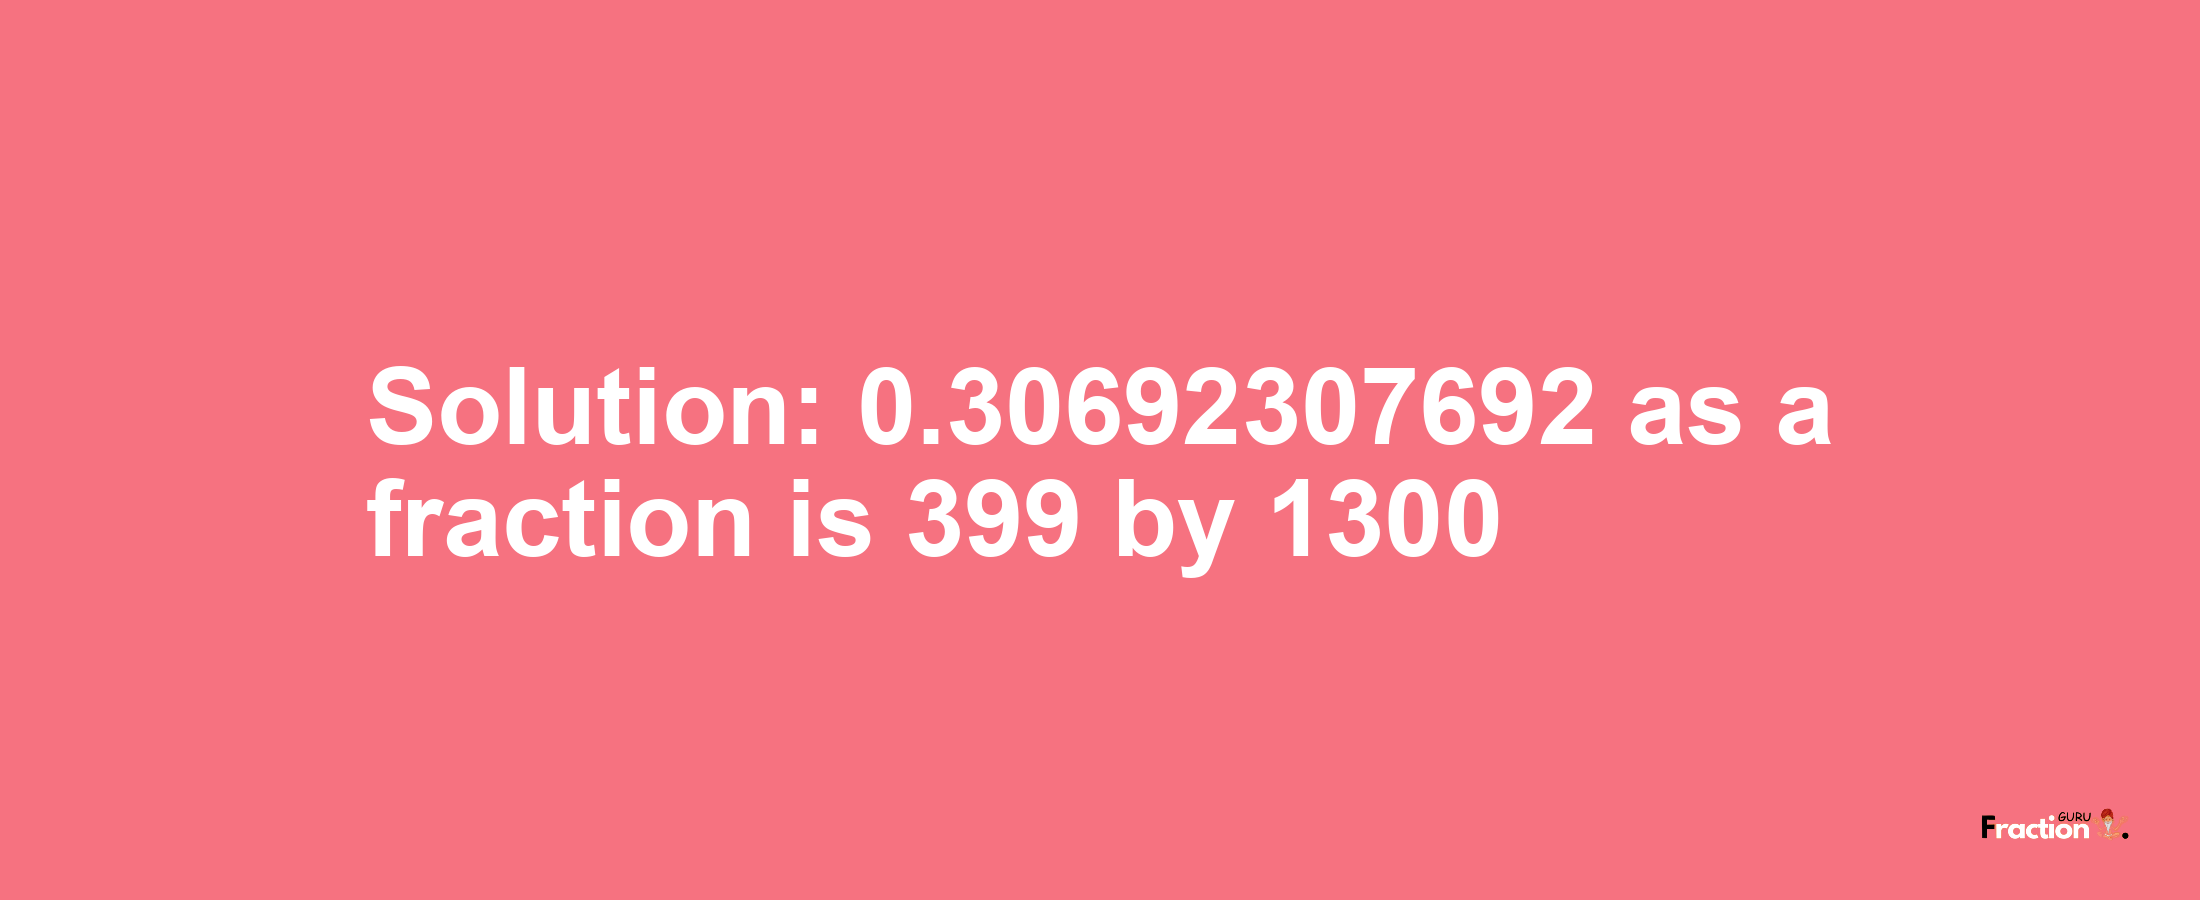 Solution:0.30692307692 as a fraction is 399/1300